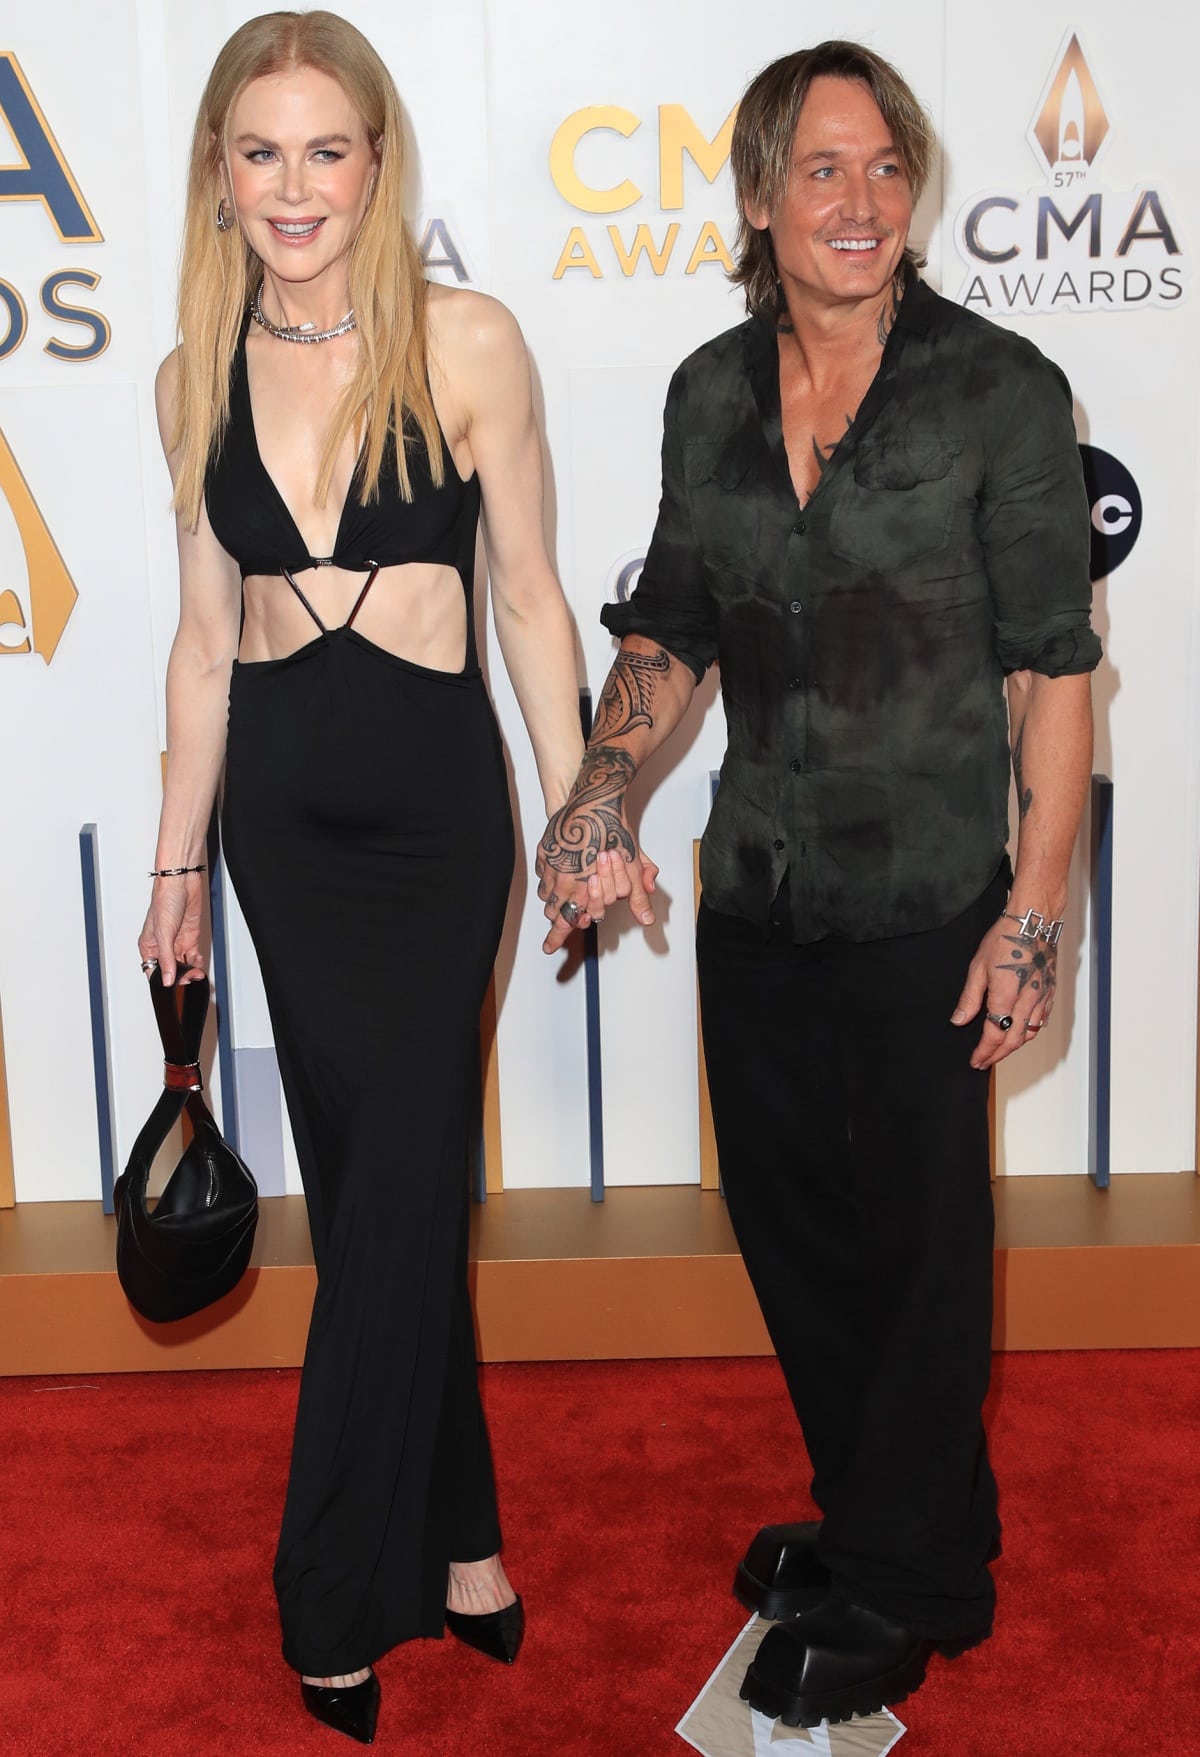 Nicole Kidman and Keith Urban were in good spirits as they held hands and posed for photographs on the red carpet